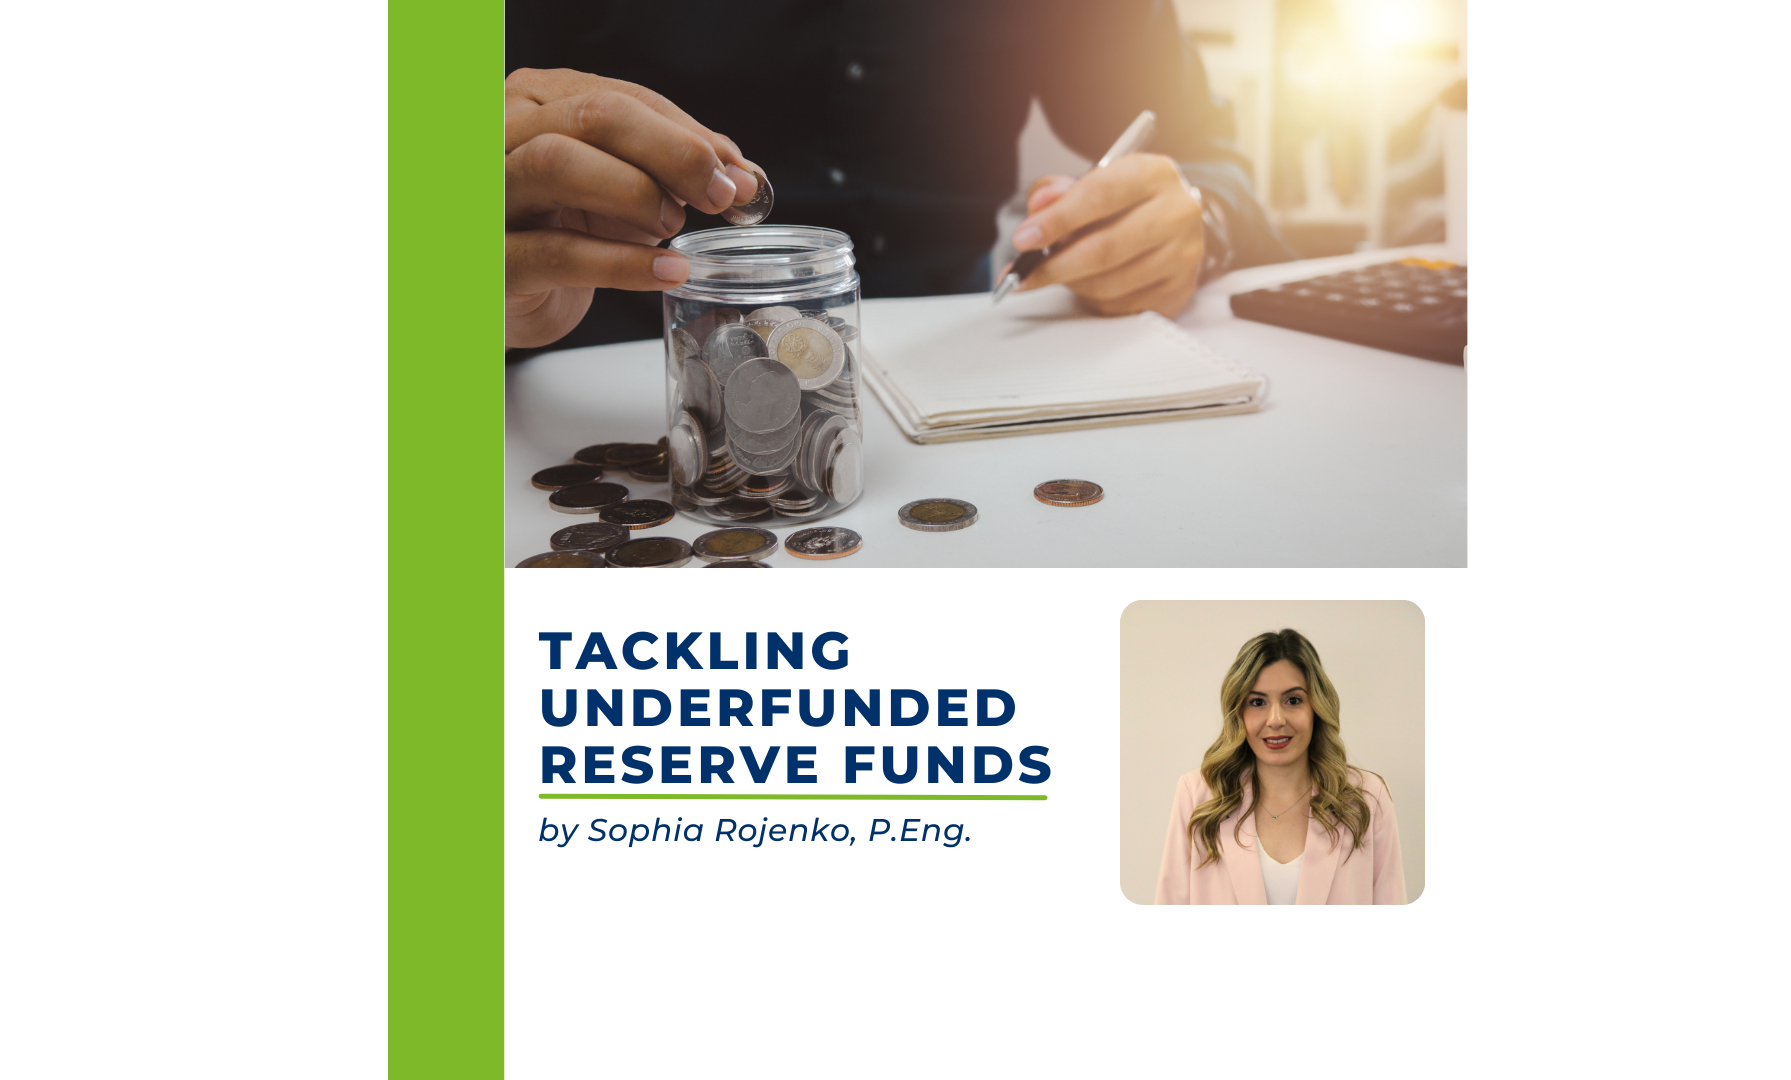 Tackling Underfunded Reserve Funds: A must-read for Board Members and Property Managers.